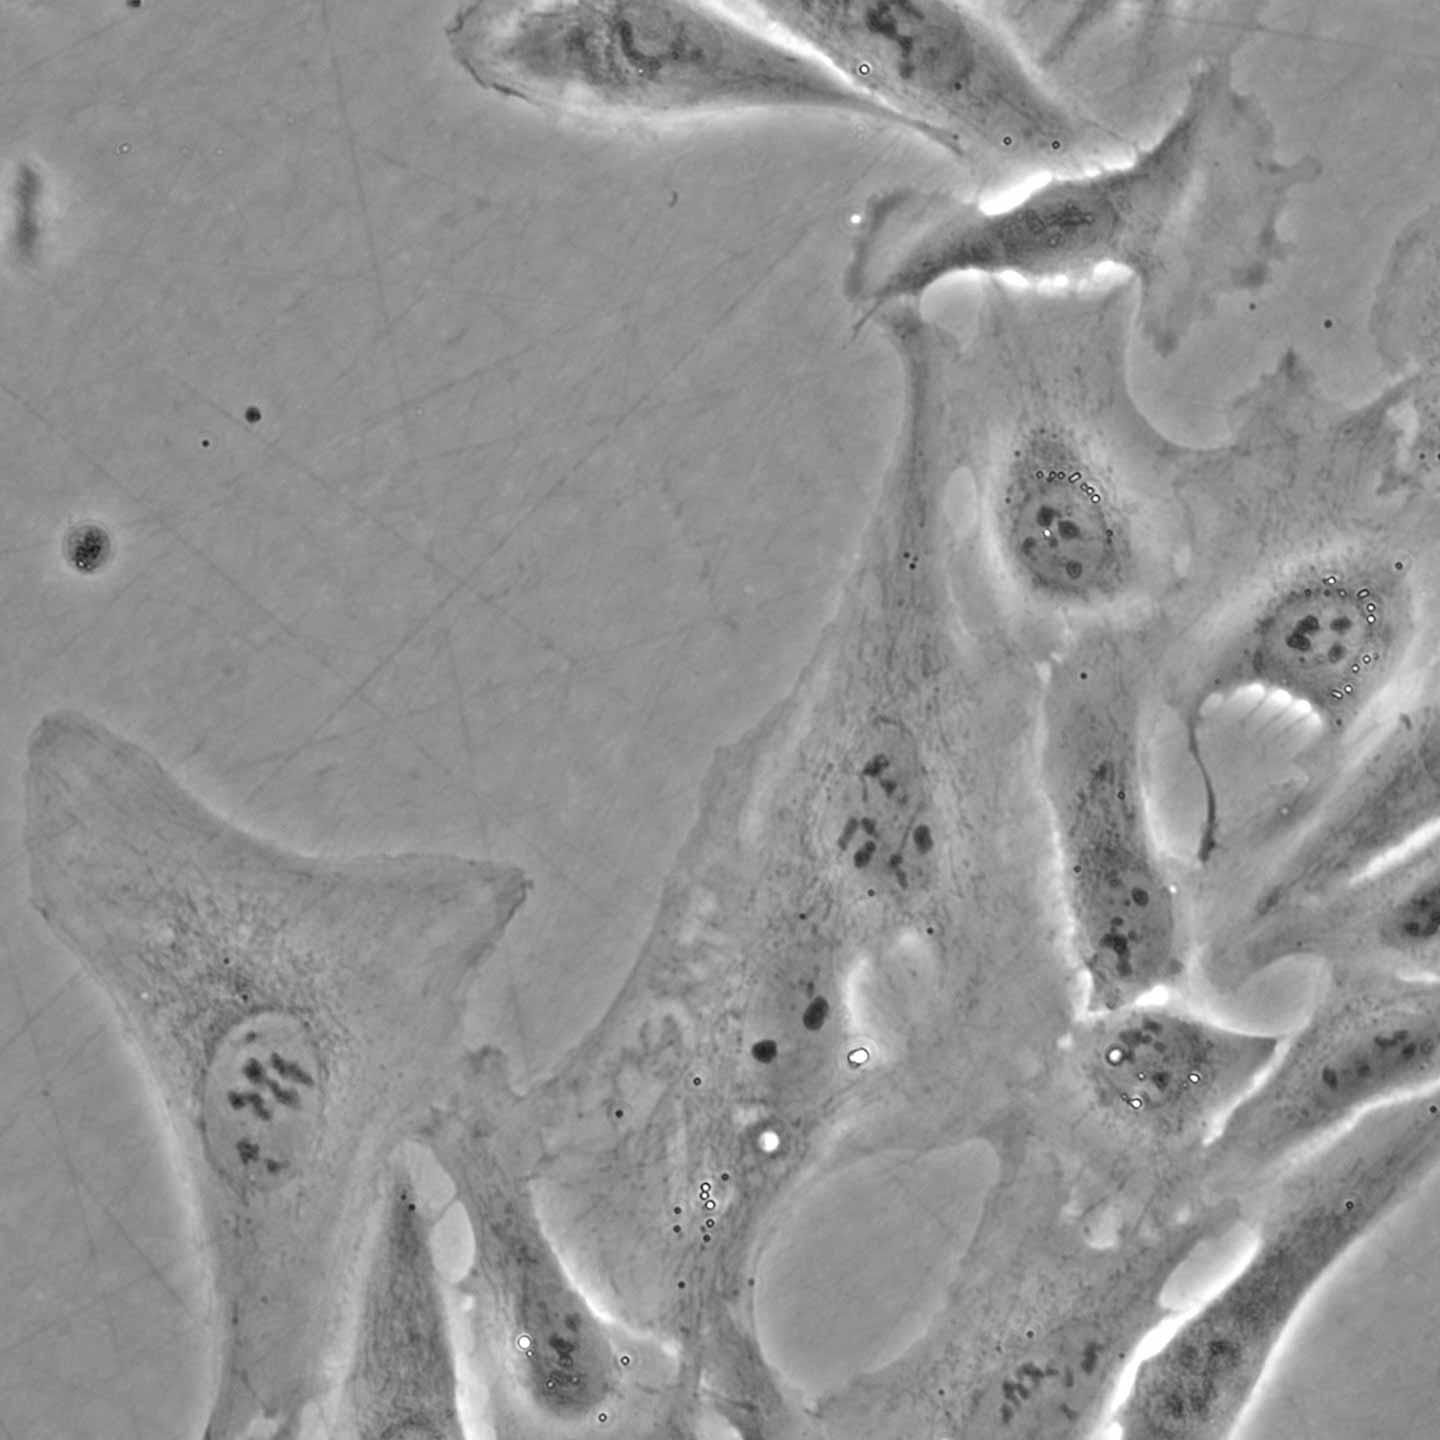 U2OS cells in phase contrast, transmitted light image, objective: LD A-Plan 40x/0.55 Ph 1